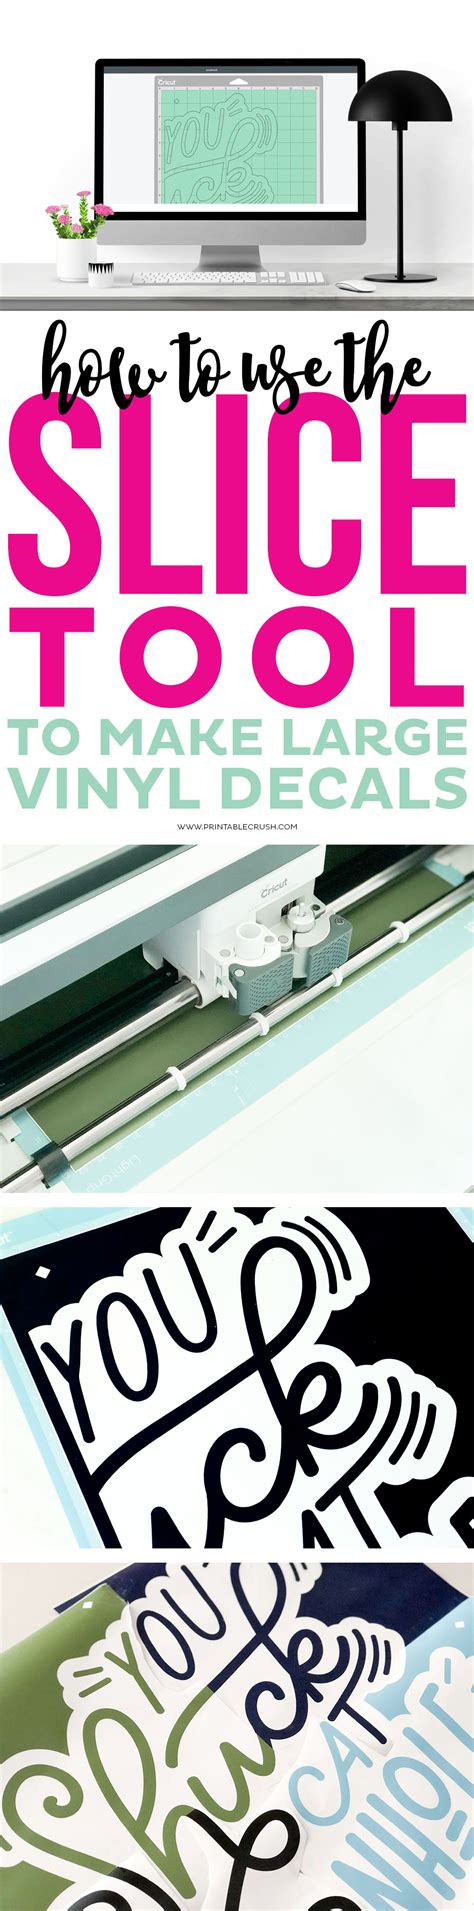 Place your printed (and laminated) sheet onto your cutting mat, and feed that into your silhouette. How to Use the Slice Tool to Make Large Vinyl Decals ...